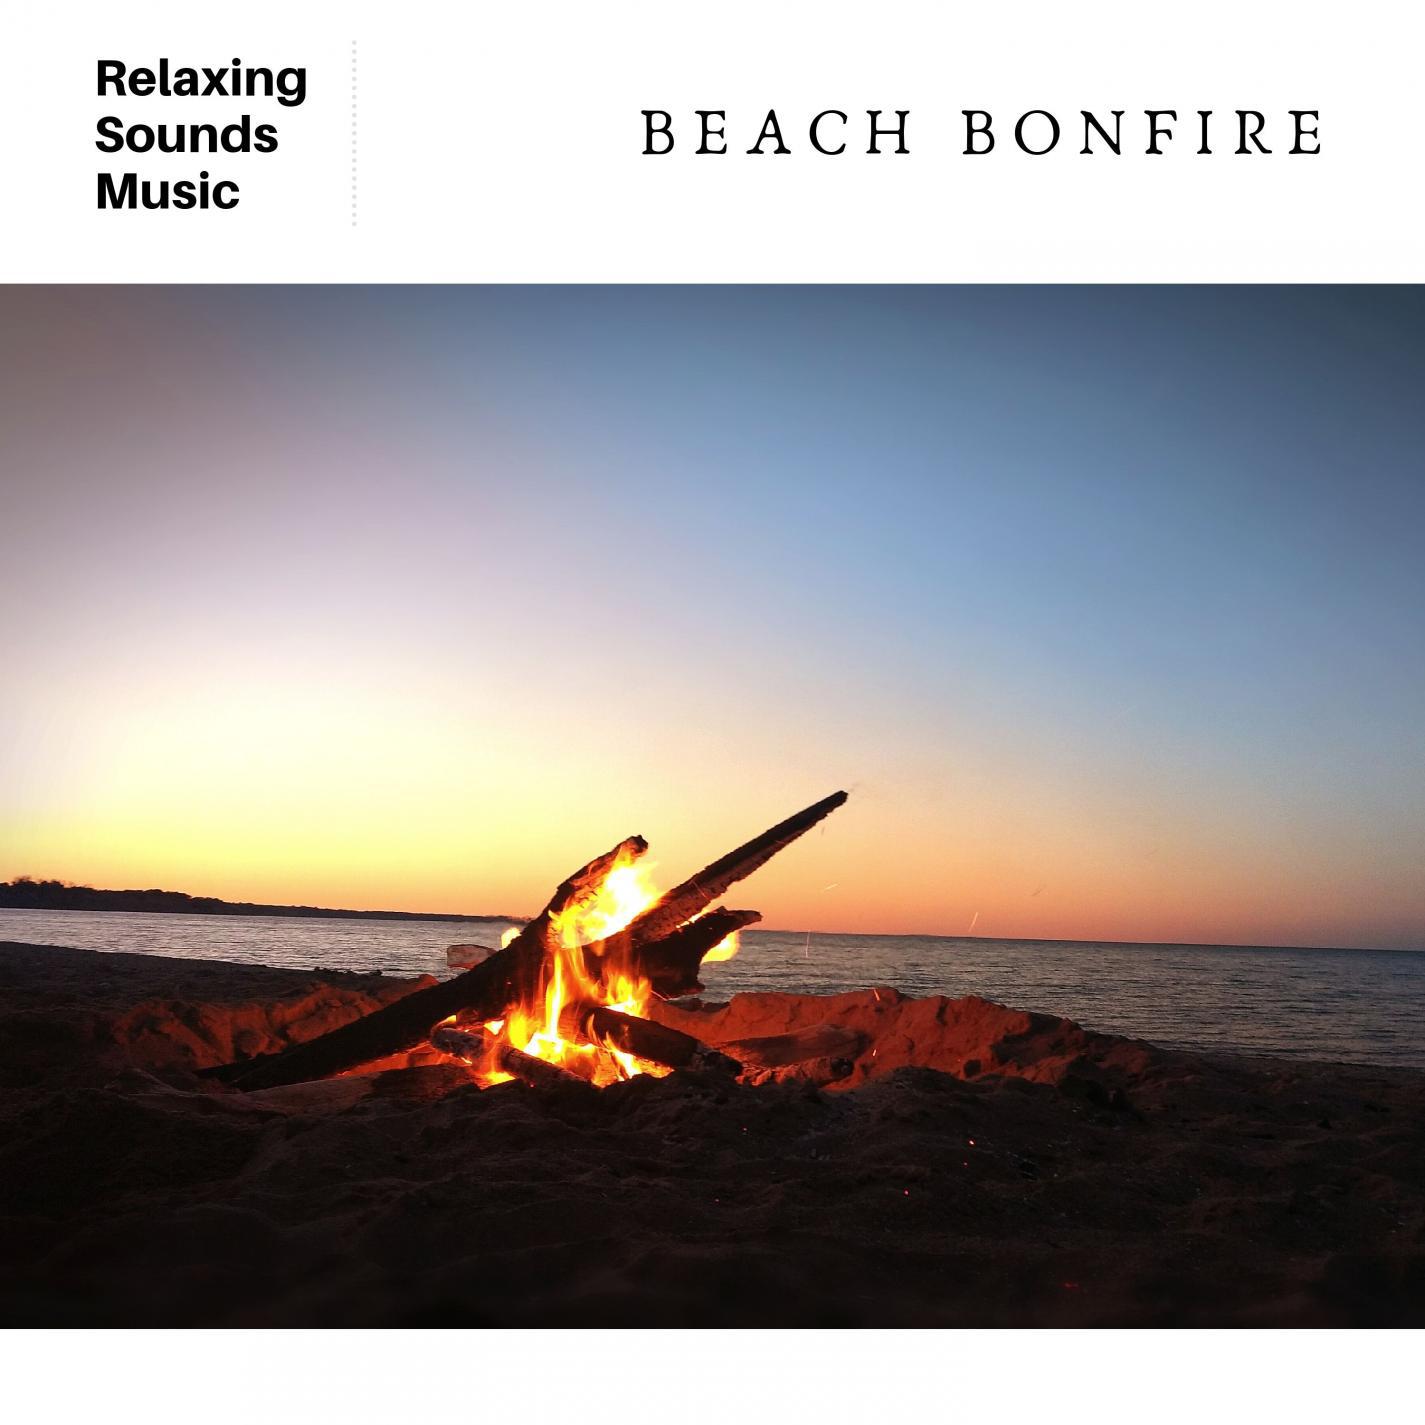 On the Beach Fire Sounds